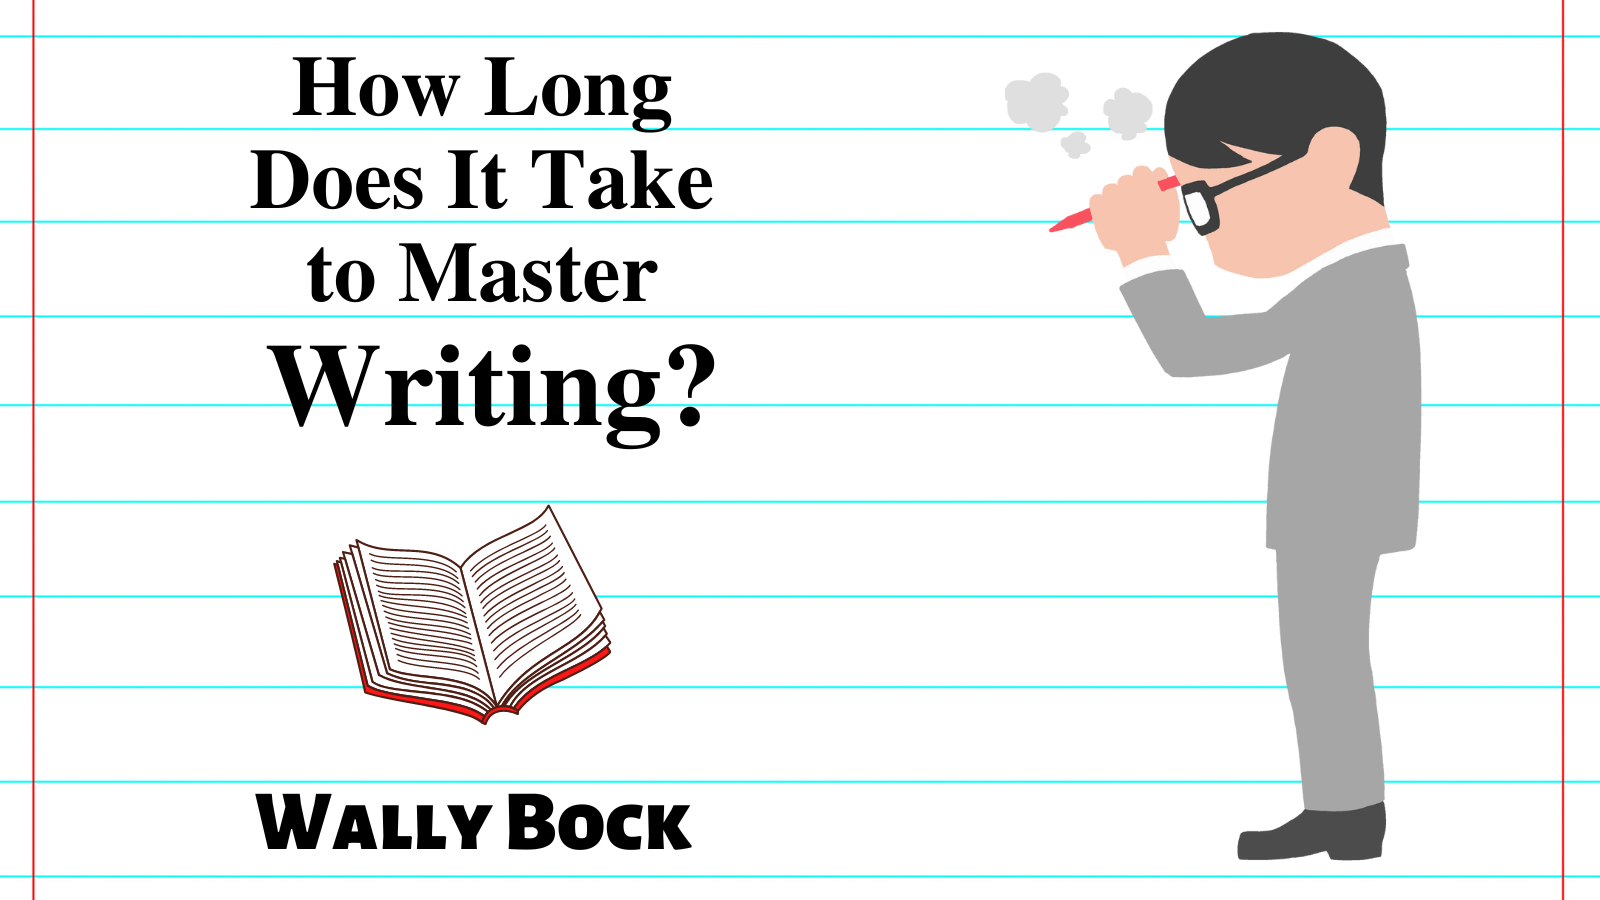 Better Writing: How long does it take to master writing?